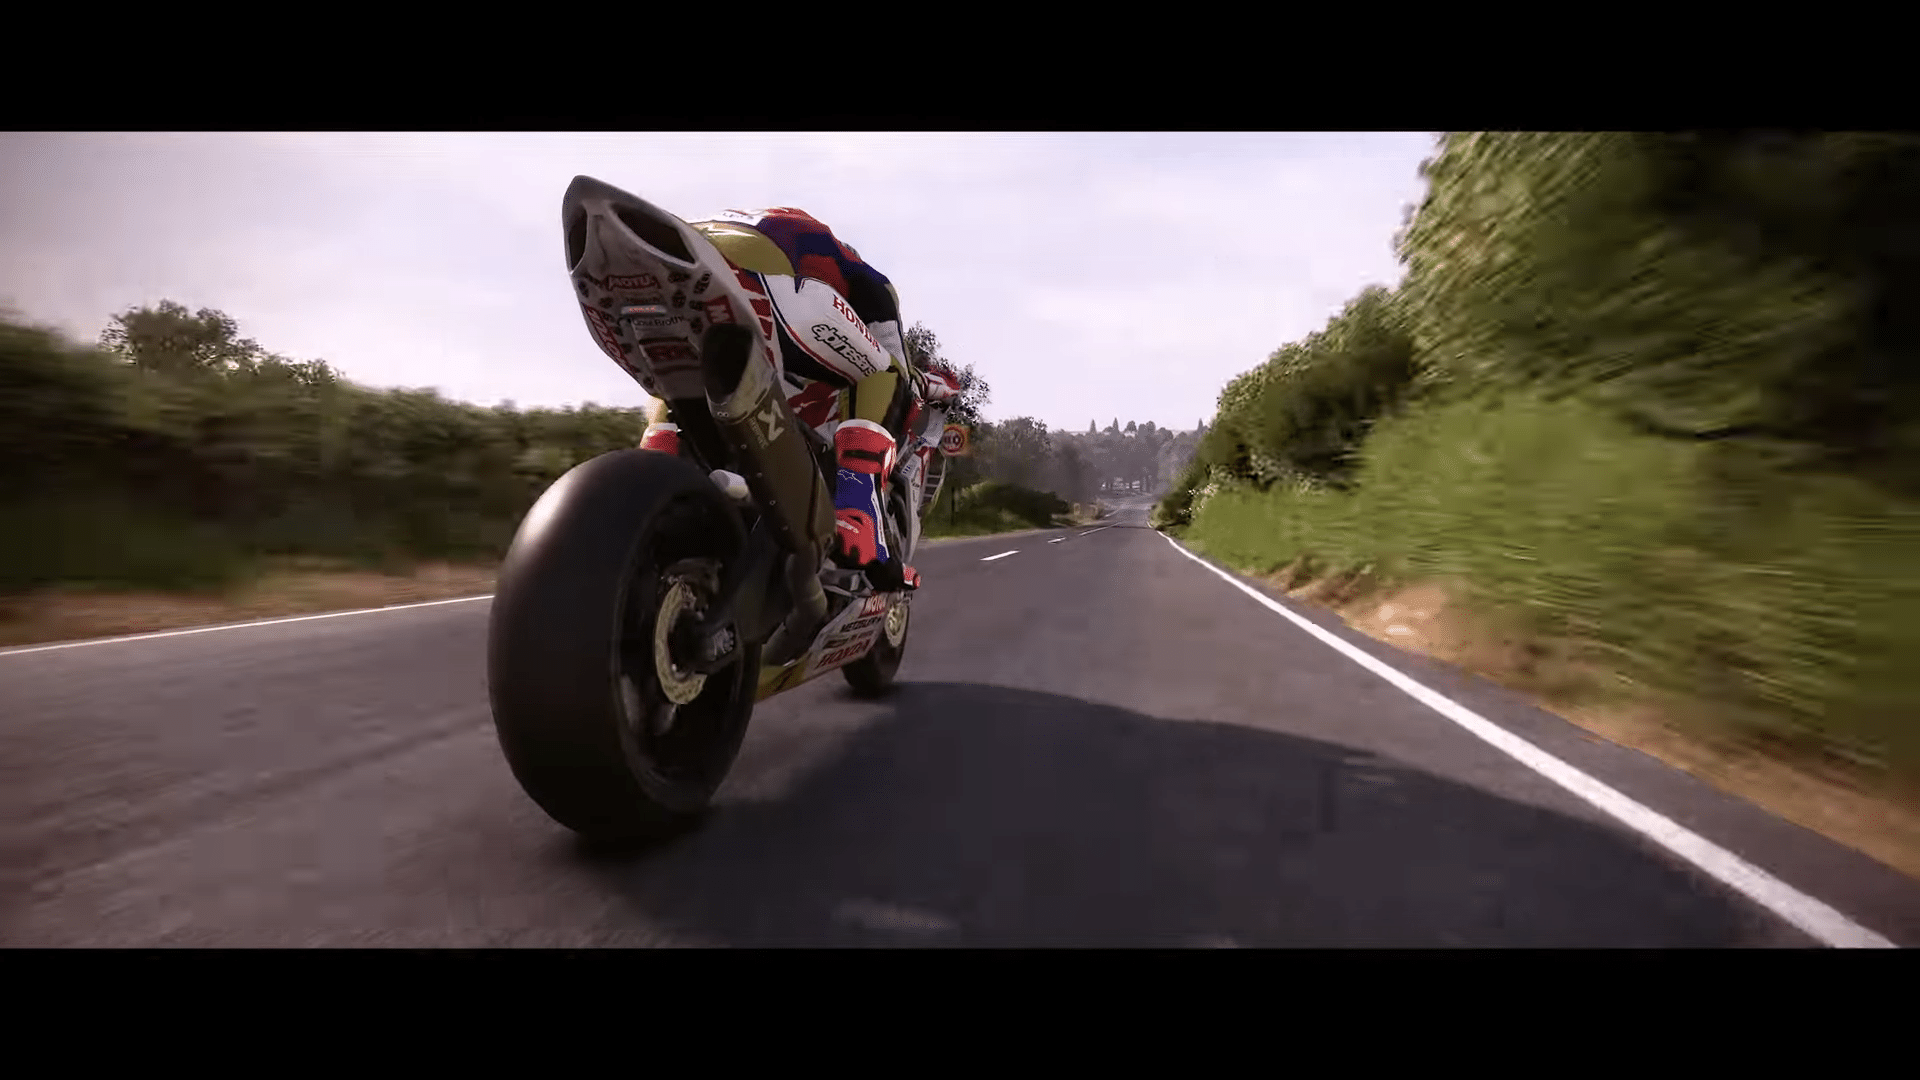 TT Isle of Man – Ride on the Edge 3 Release Date Set for May 11, New Trailer Revealed